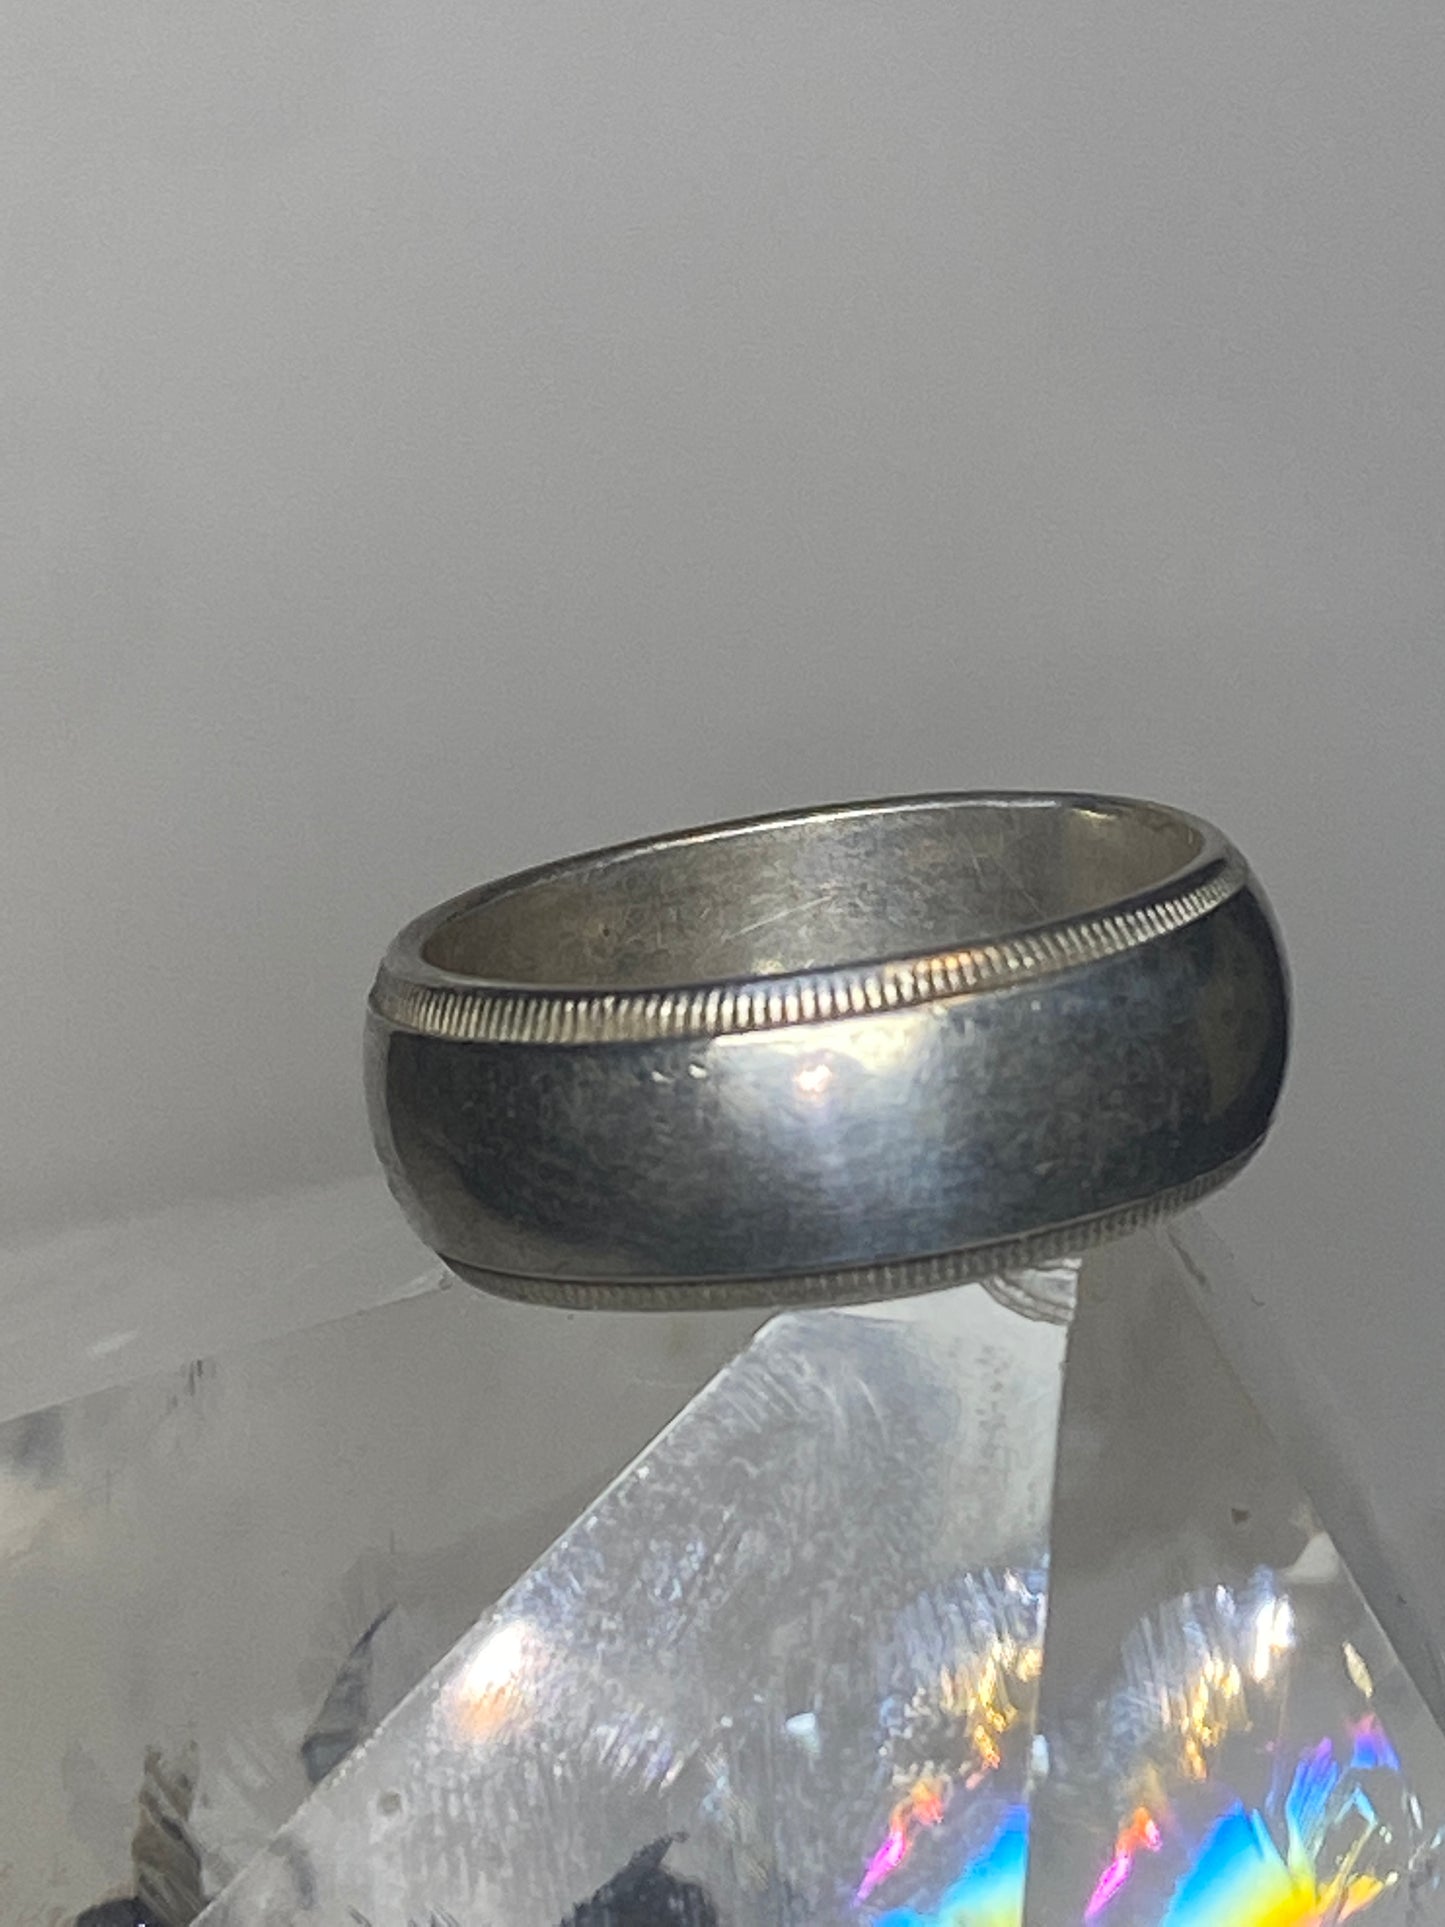 Vintage Plain ring size 5.25 wedding band stacker sterling silver S